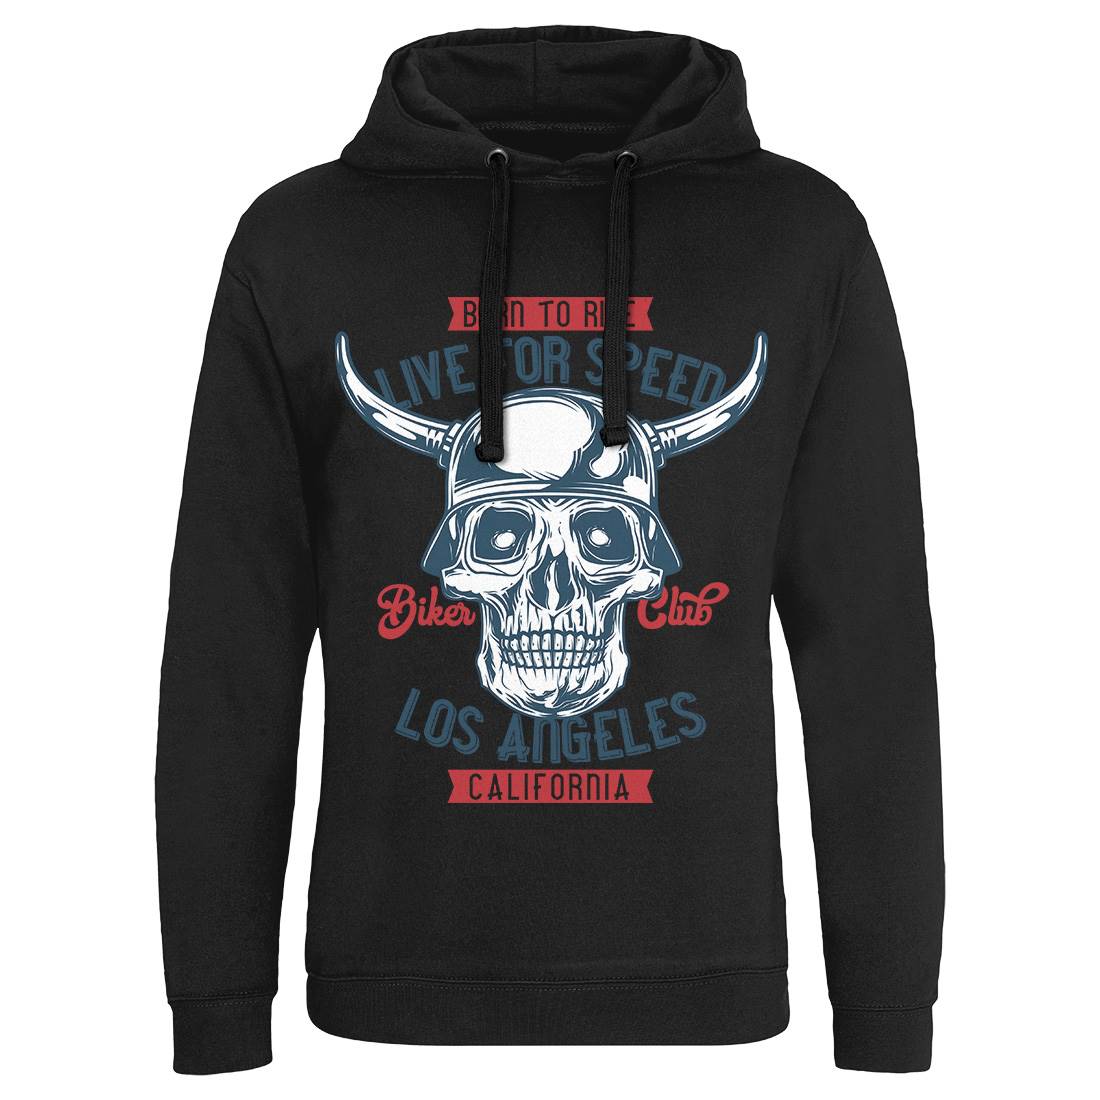 Live For Speed Mens Hoodie Without Pocket Motorcycles B851